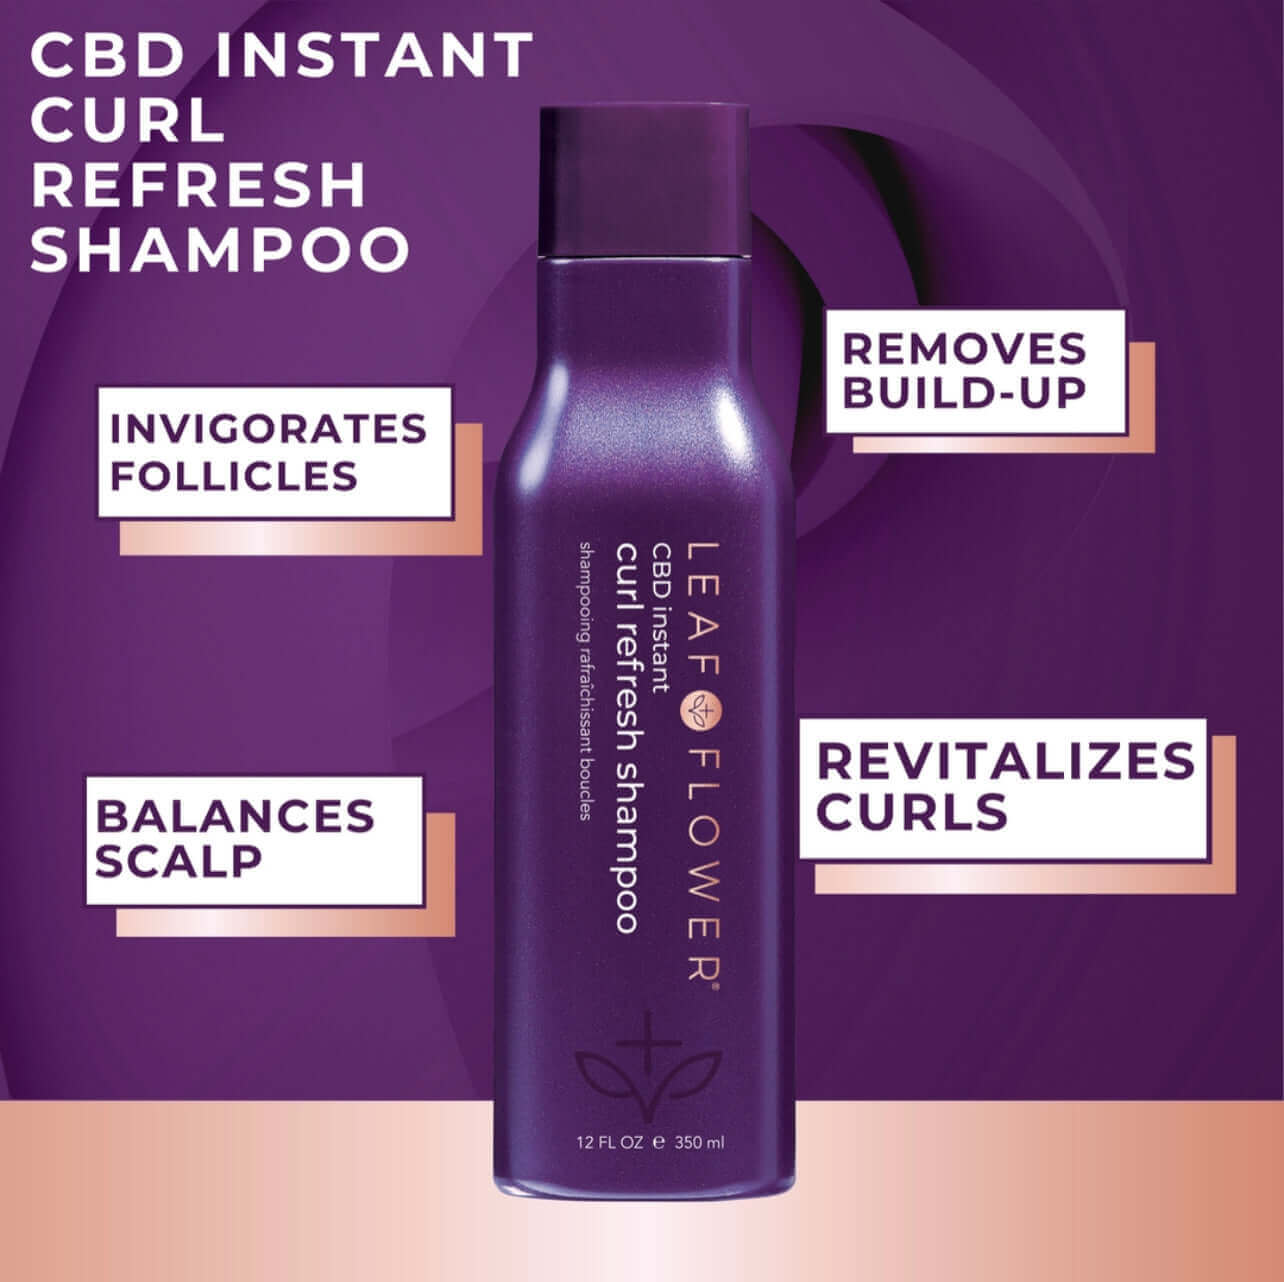 Leaf and Flower Instant Curl Refresh Shampoo by Leaf and Flower is specifically formulated to rejuvenate curls and remove build-up, while preserving natural oils.